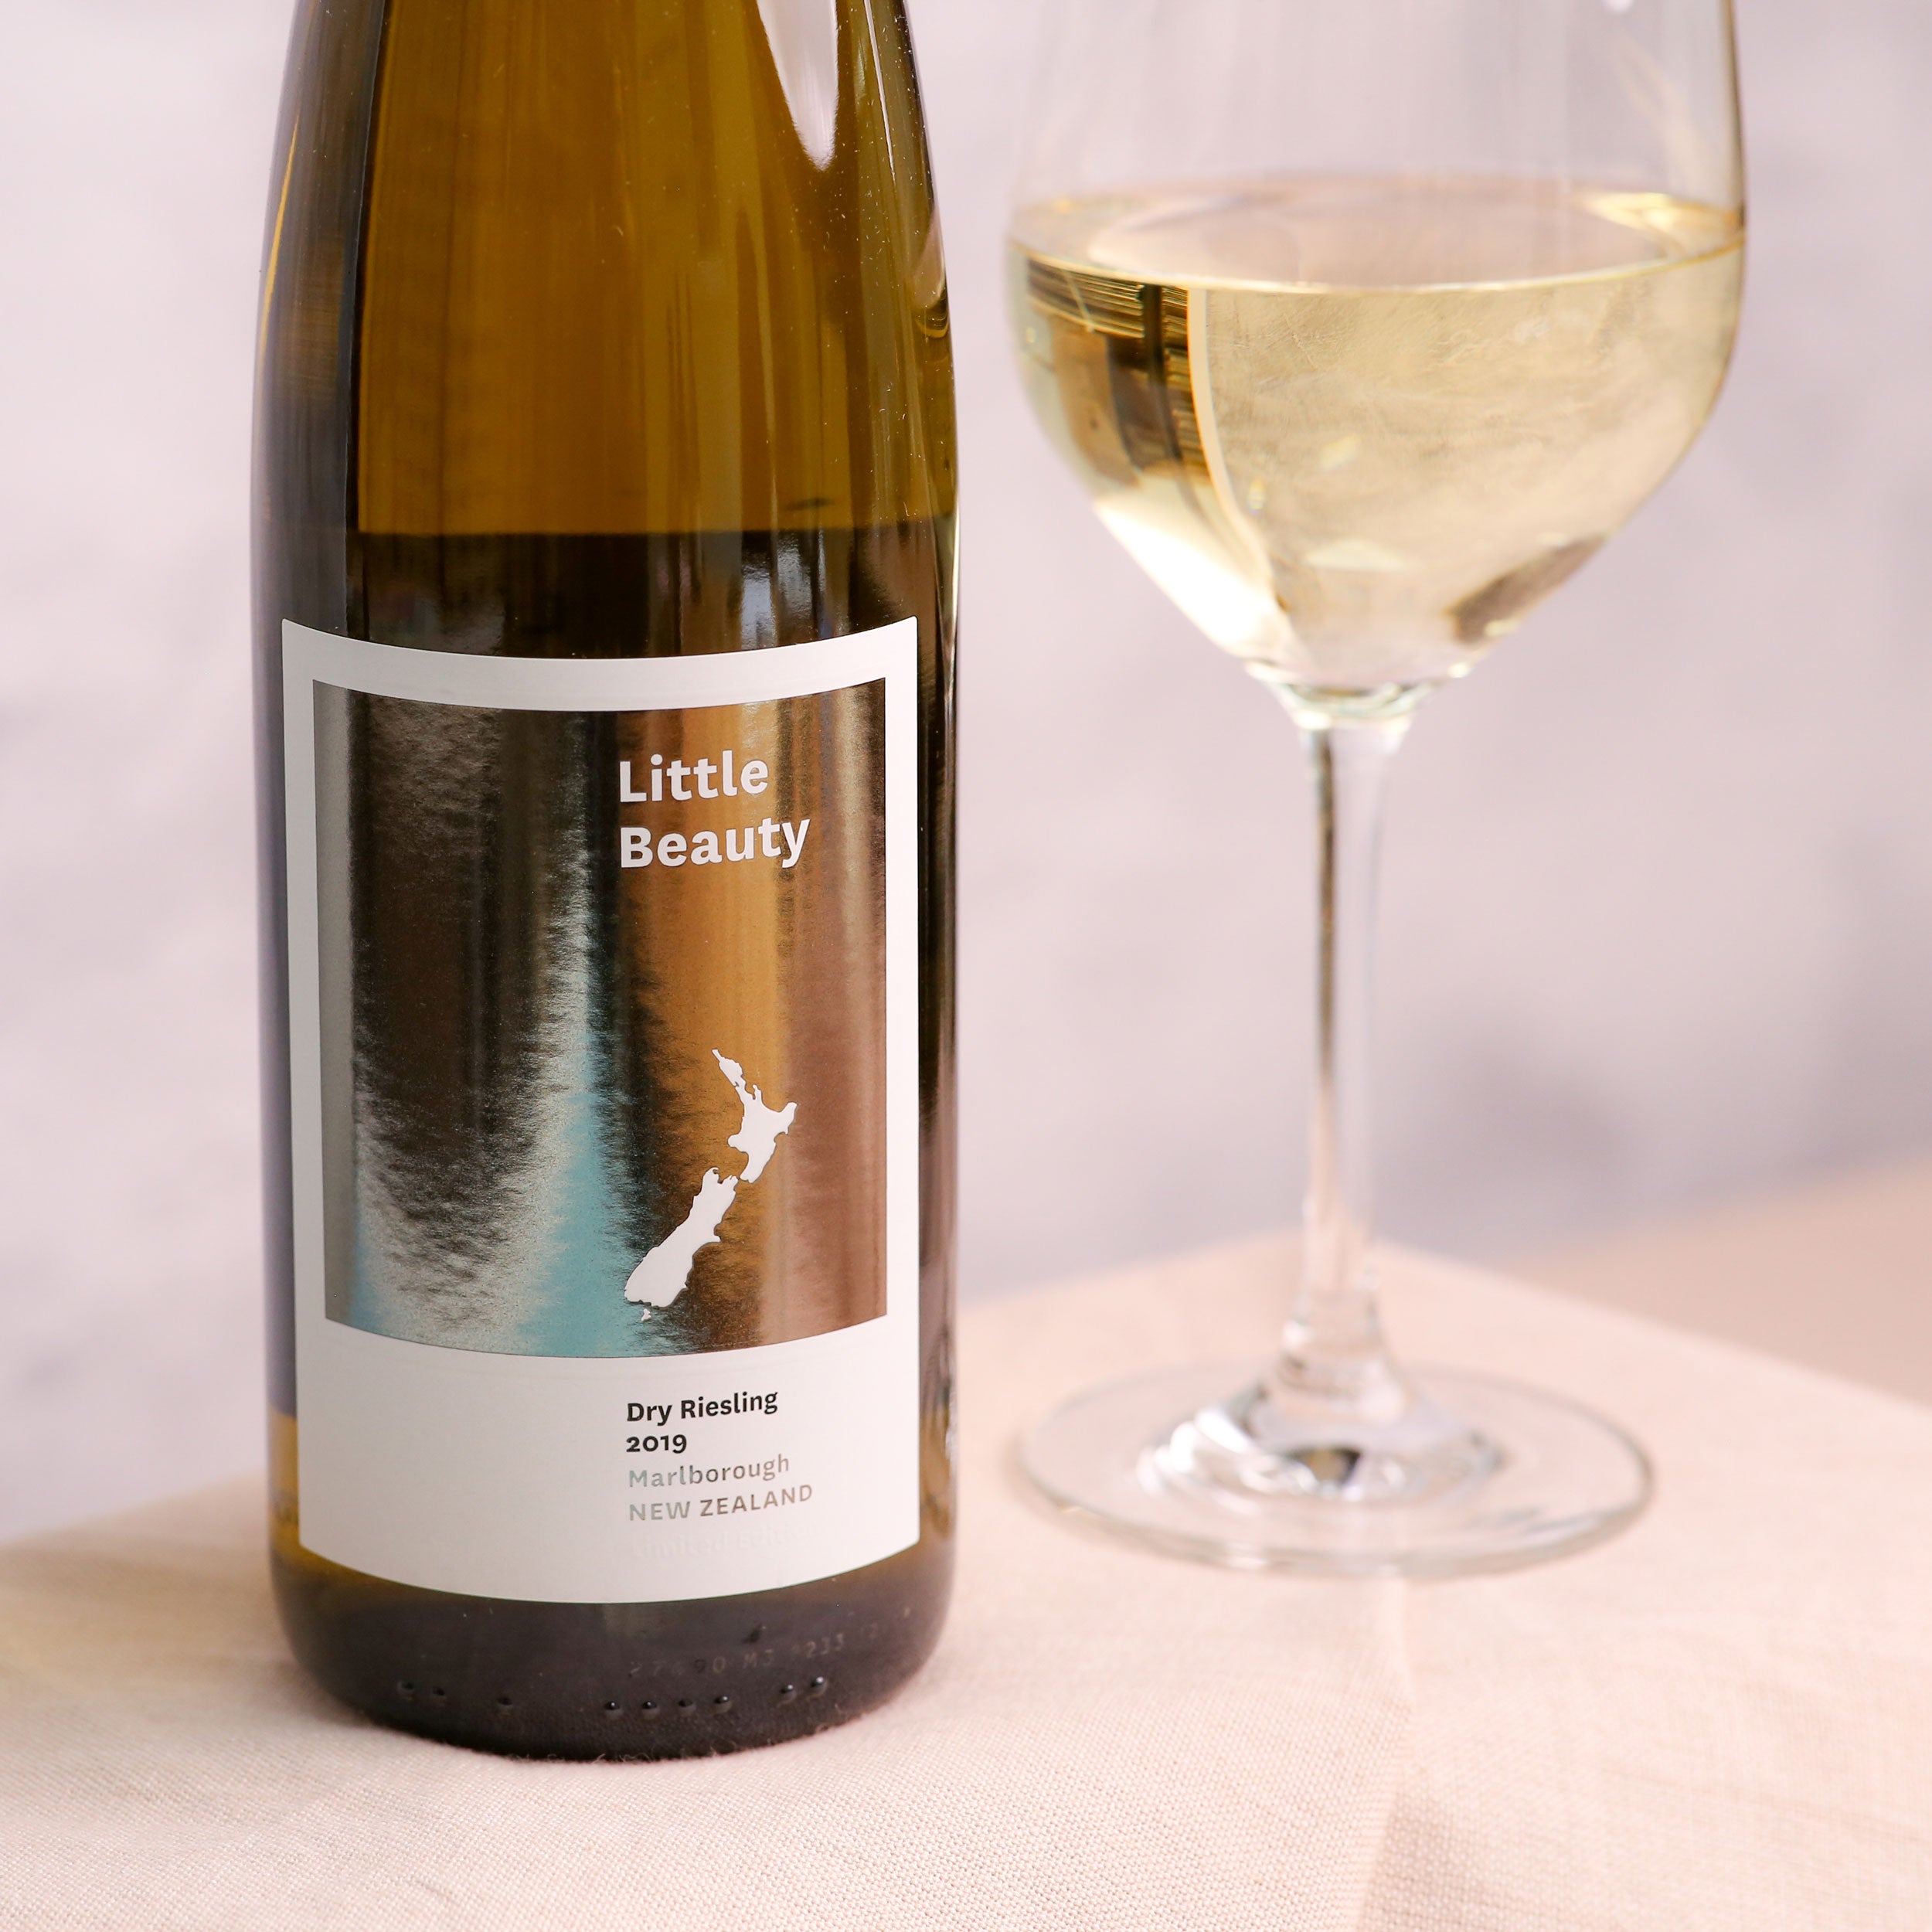 Little Beauty Dry Riesling Marlborough New Zealand 2019 – Noble House